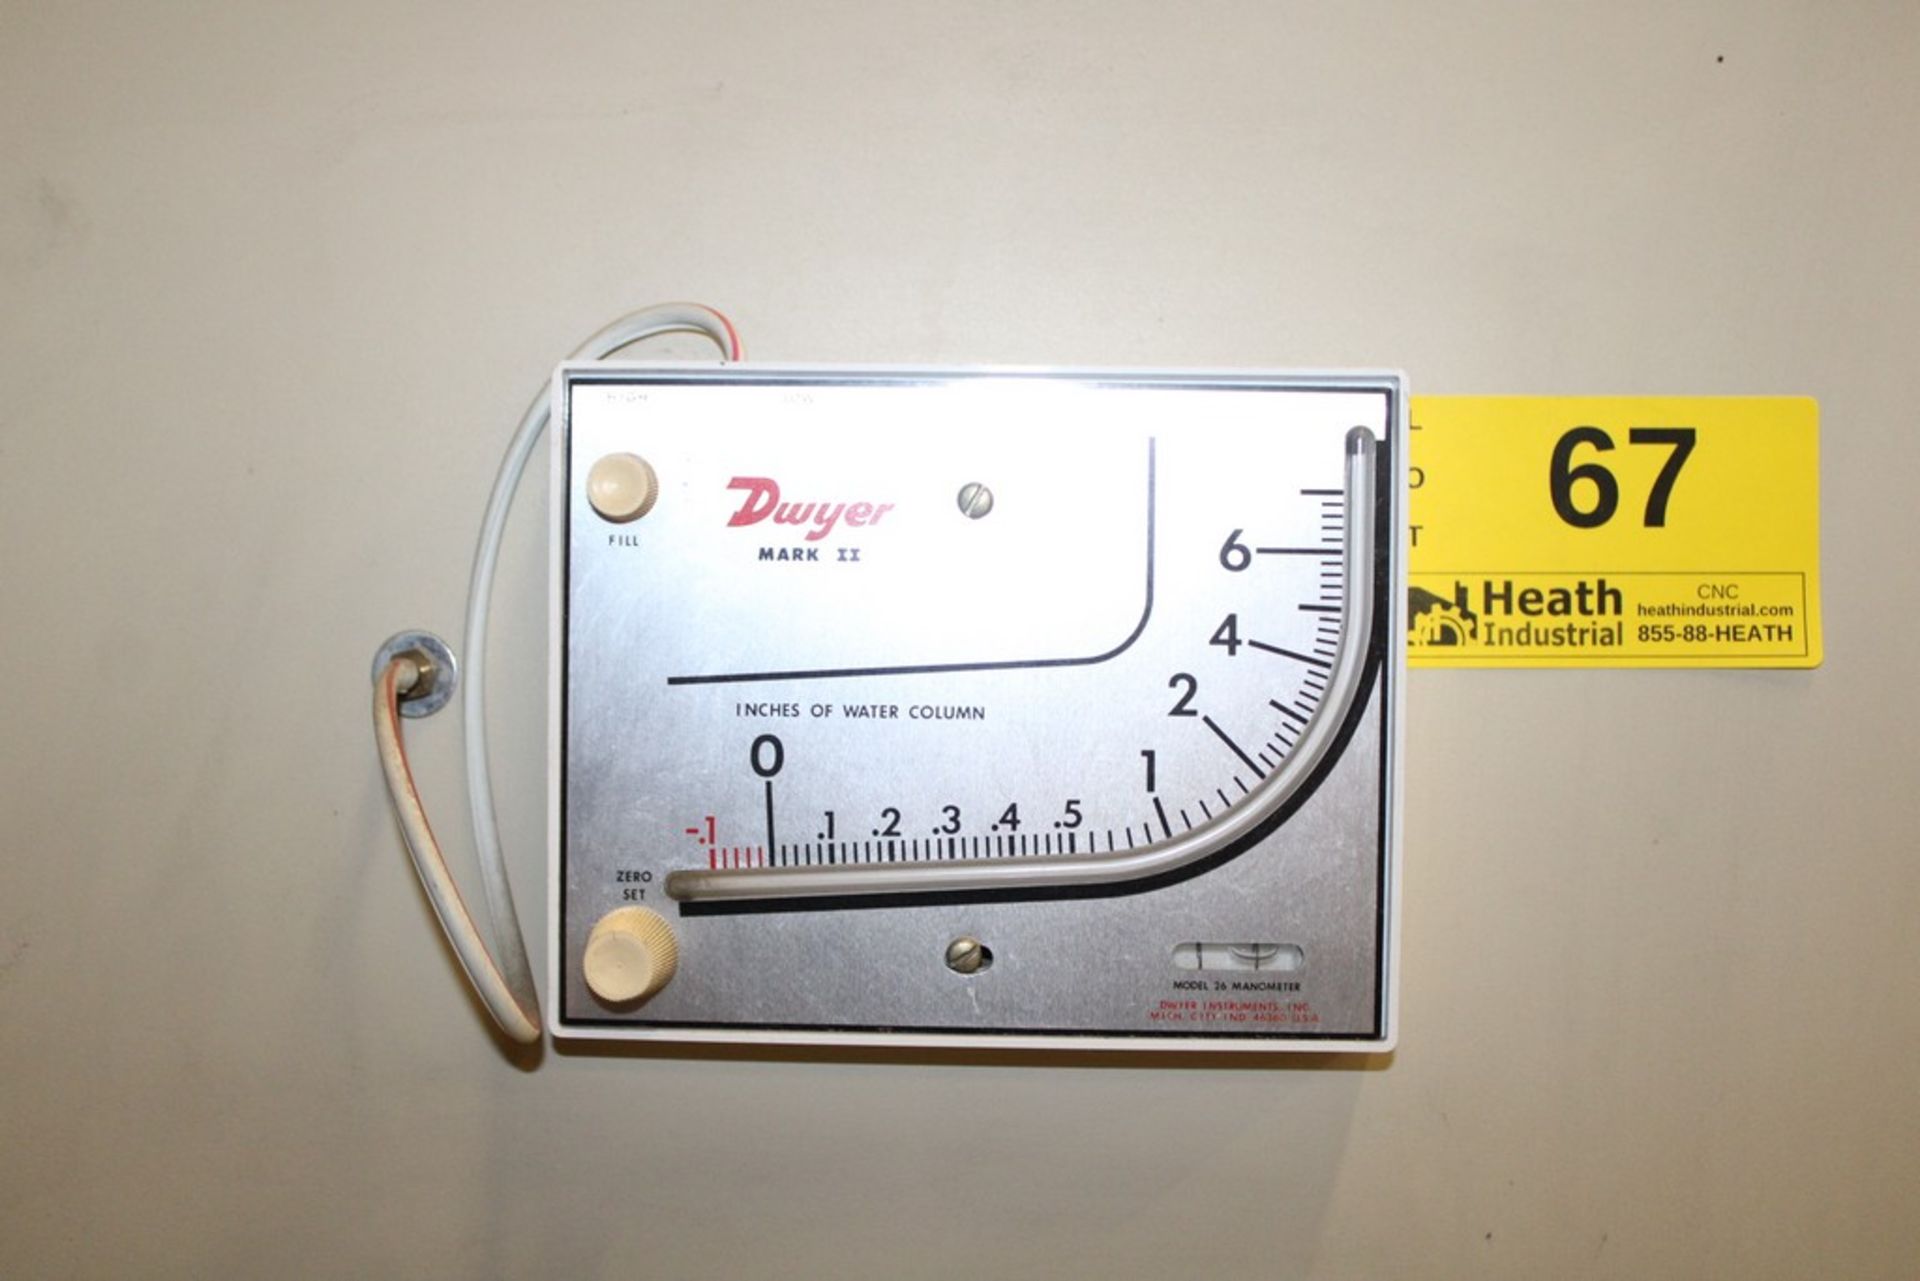 AIR QUALITY ENGINEERING FUME EXTRACTOR WITH DWYER MARK II MODEL 26 MANOMETER - Image 2 of 3